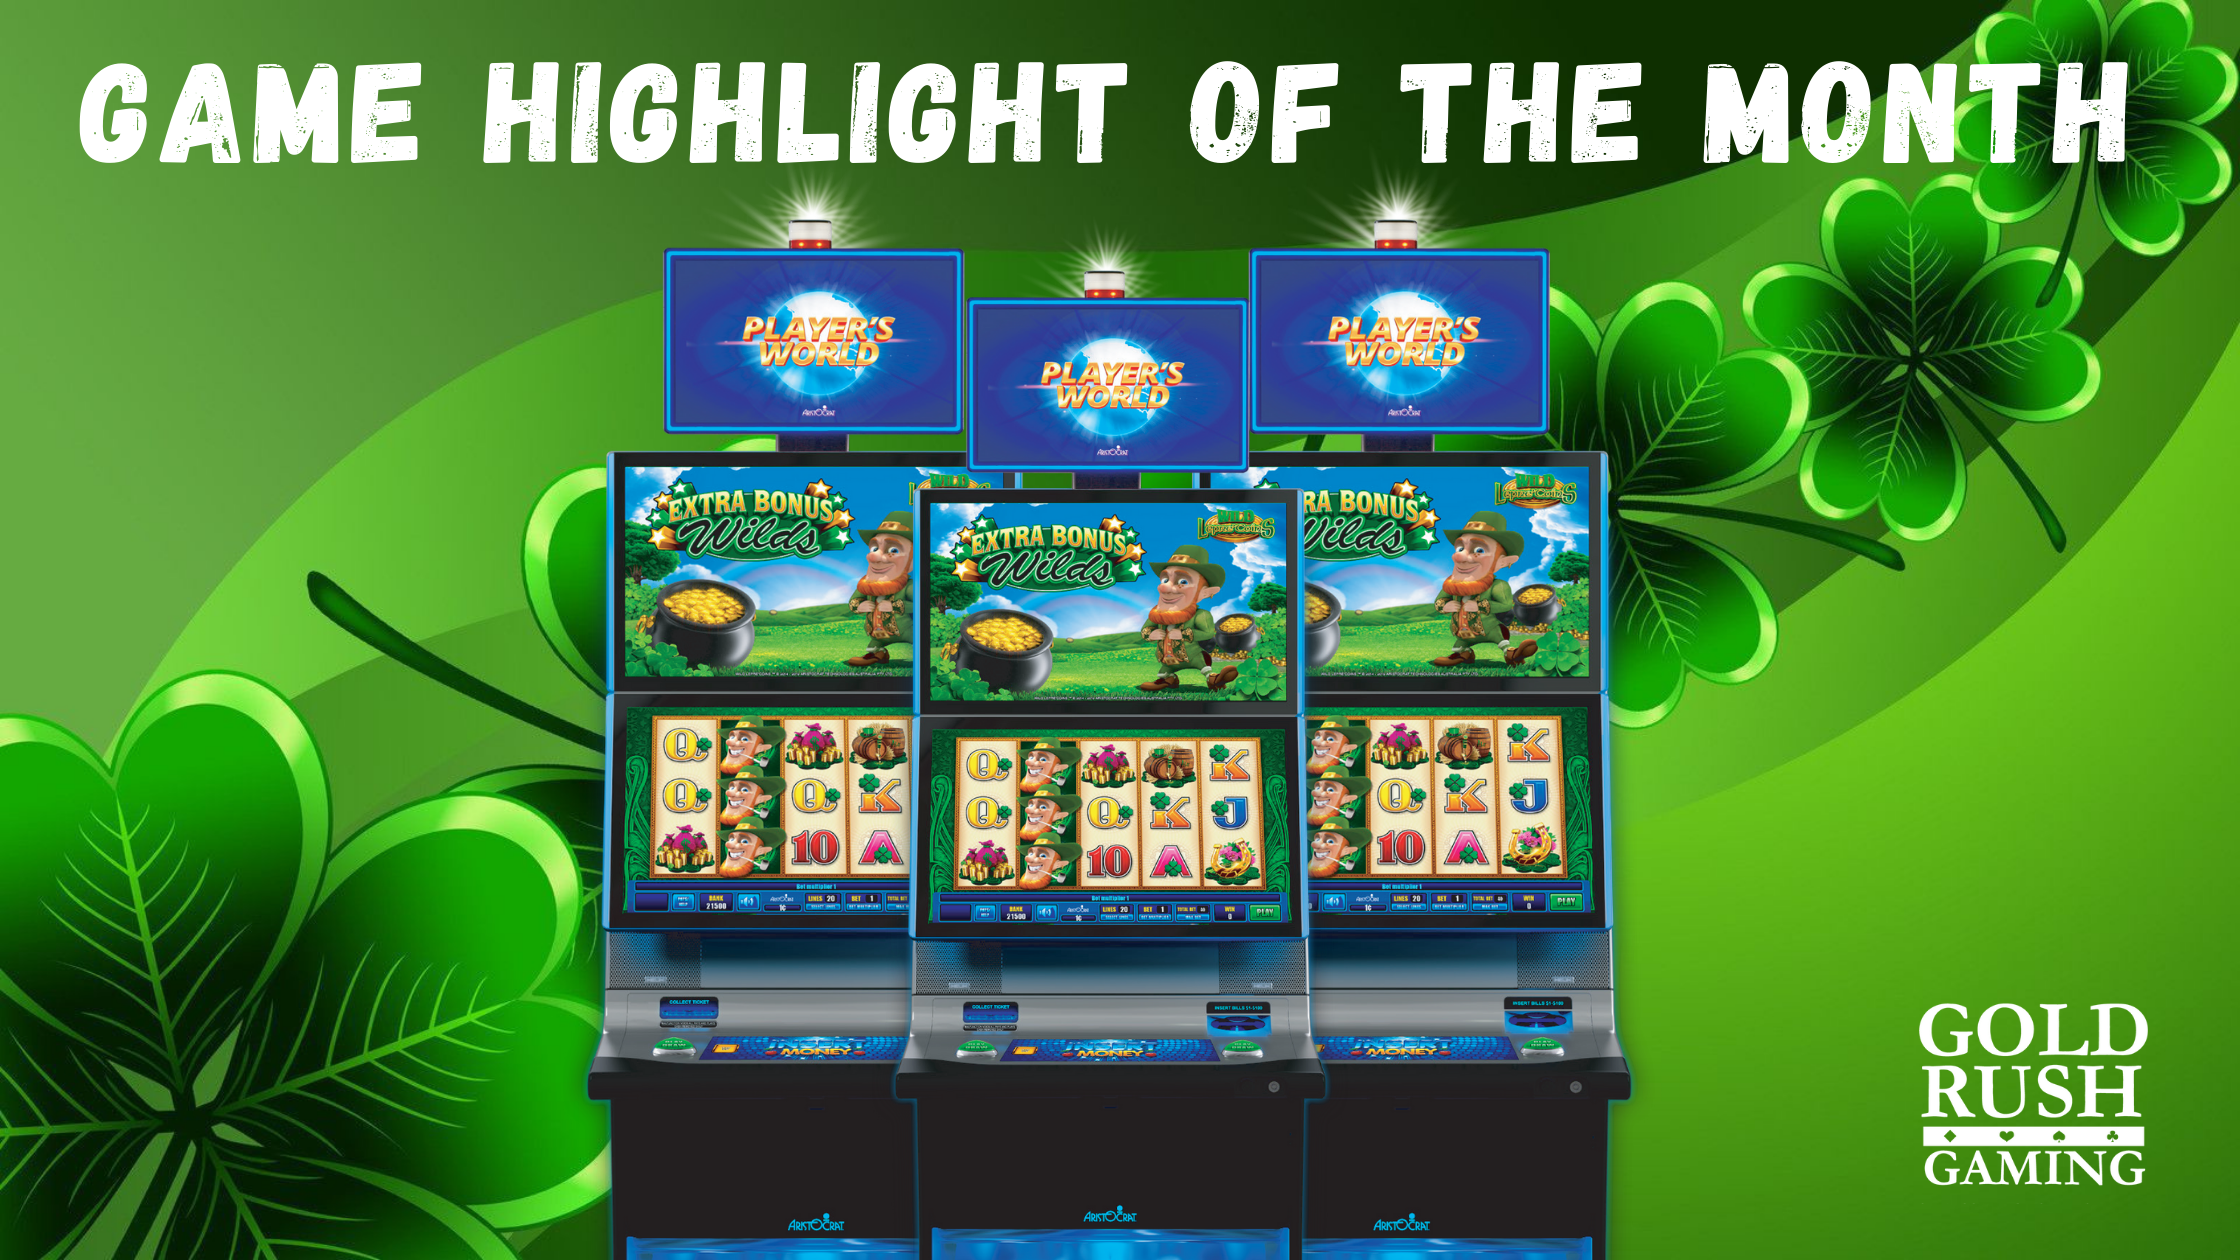 Game Highlight of the Month - Wild LepreCoins